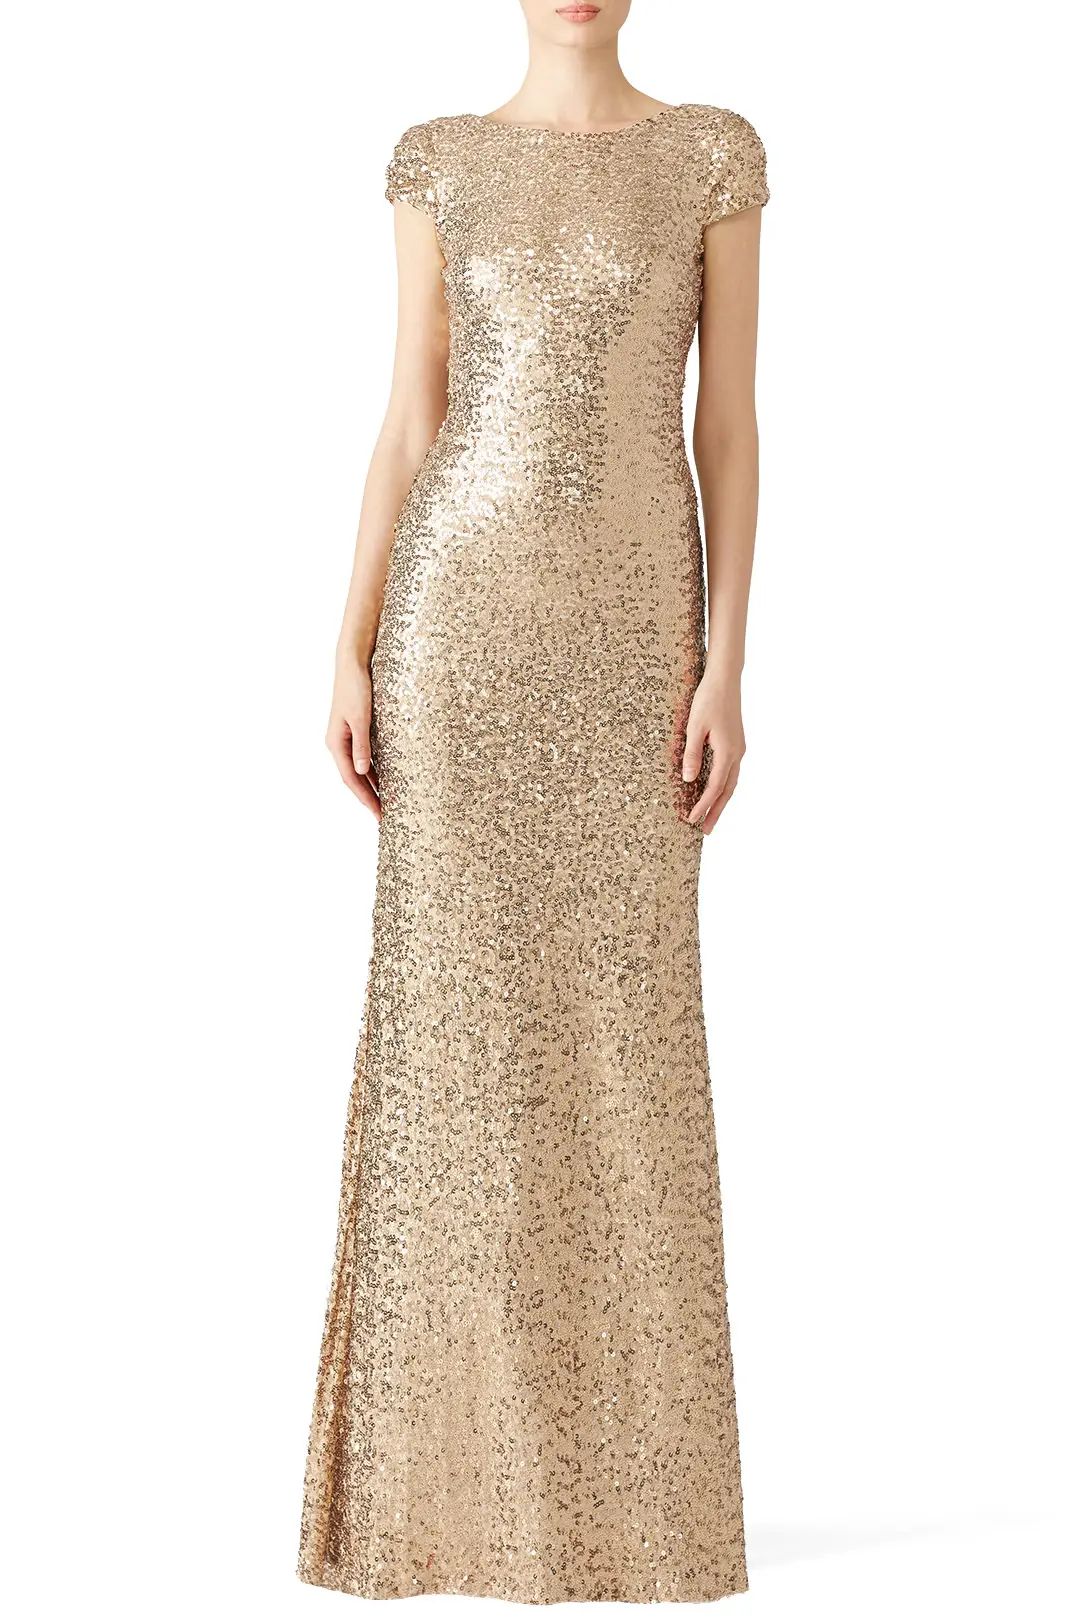 Badgley Mischka Night at the Oscars Gown | Rent The Runway